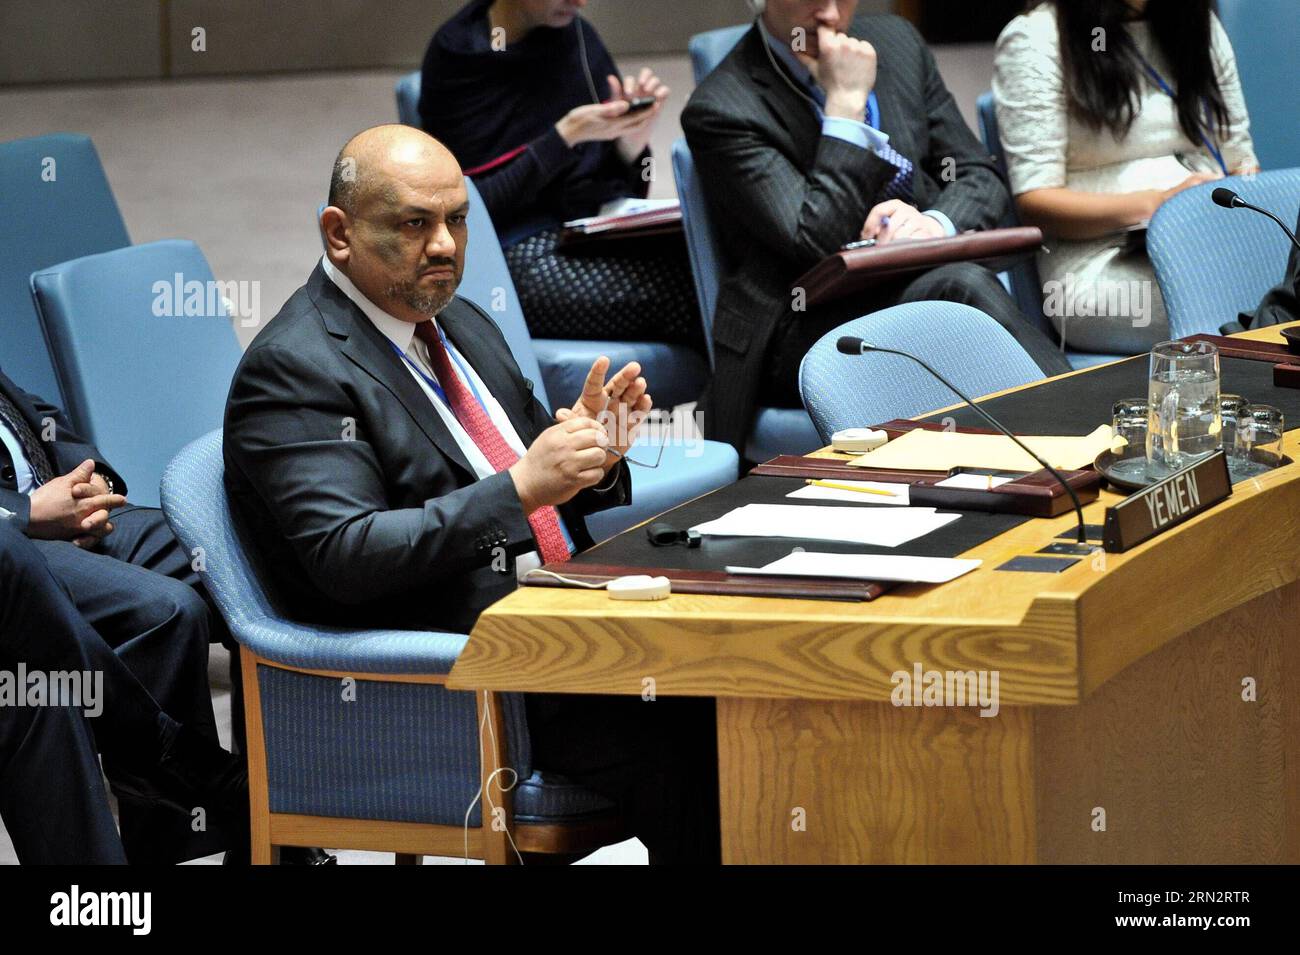 (150322) -- NEW YORK, March 22, 2015 -- Yemen s Permanent Representative to the UN Khaled Hussein Mohamed Alyemany looks on during an emergency meeting of the UN Security Council regarding the situation of Yemen, at the UN headquarters in New York, on March 22, 2015. The UN Security Council on Sunday adopted a presidential statement on Yemen, voicing support for Yemeni President Abdo Rabbo Mansour Hadi and calling upon all parties to refrain from taking actions that undermine the legitimacy of the president. ) UN-NEW YORK-SECURITY COUNCIL-YEMEN-EMERGENCY MEETING NiuxXiaolei PUBLICATIONxNOTxINx Stock Photo